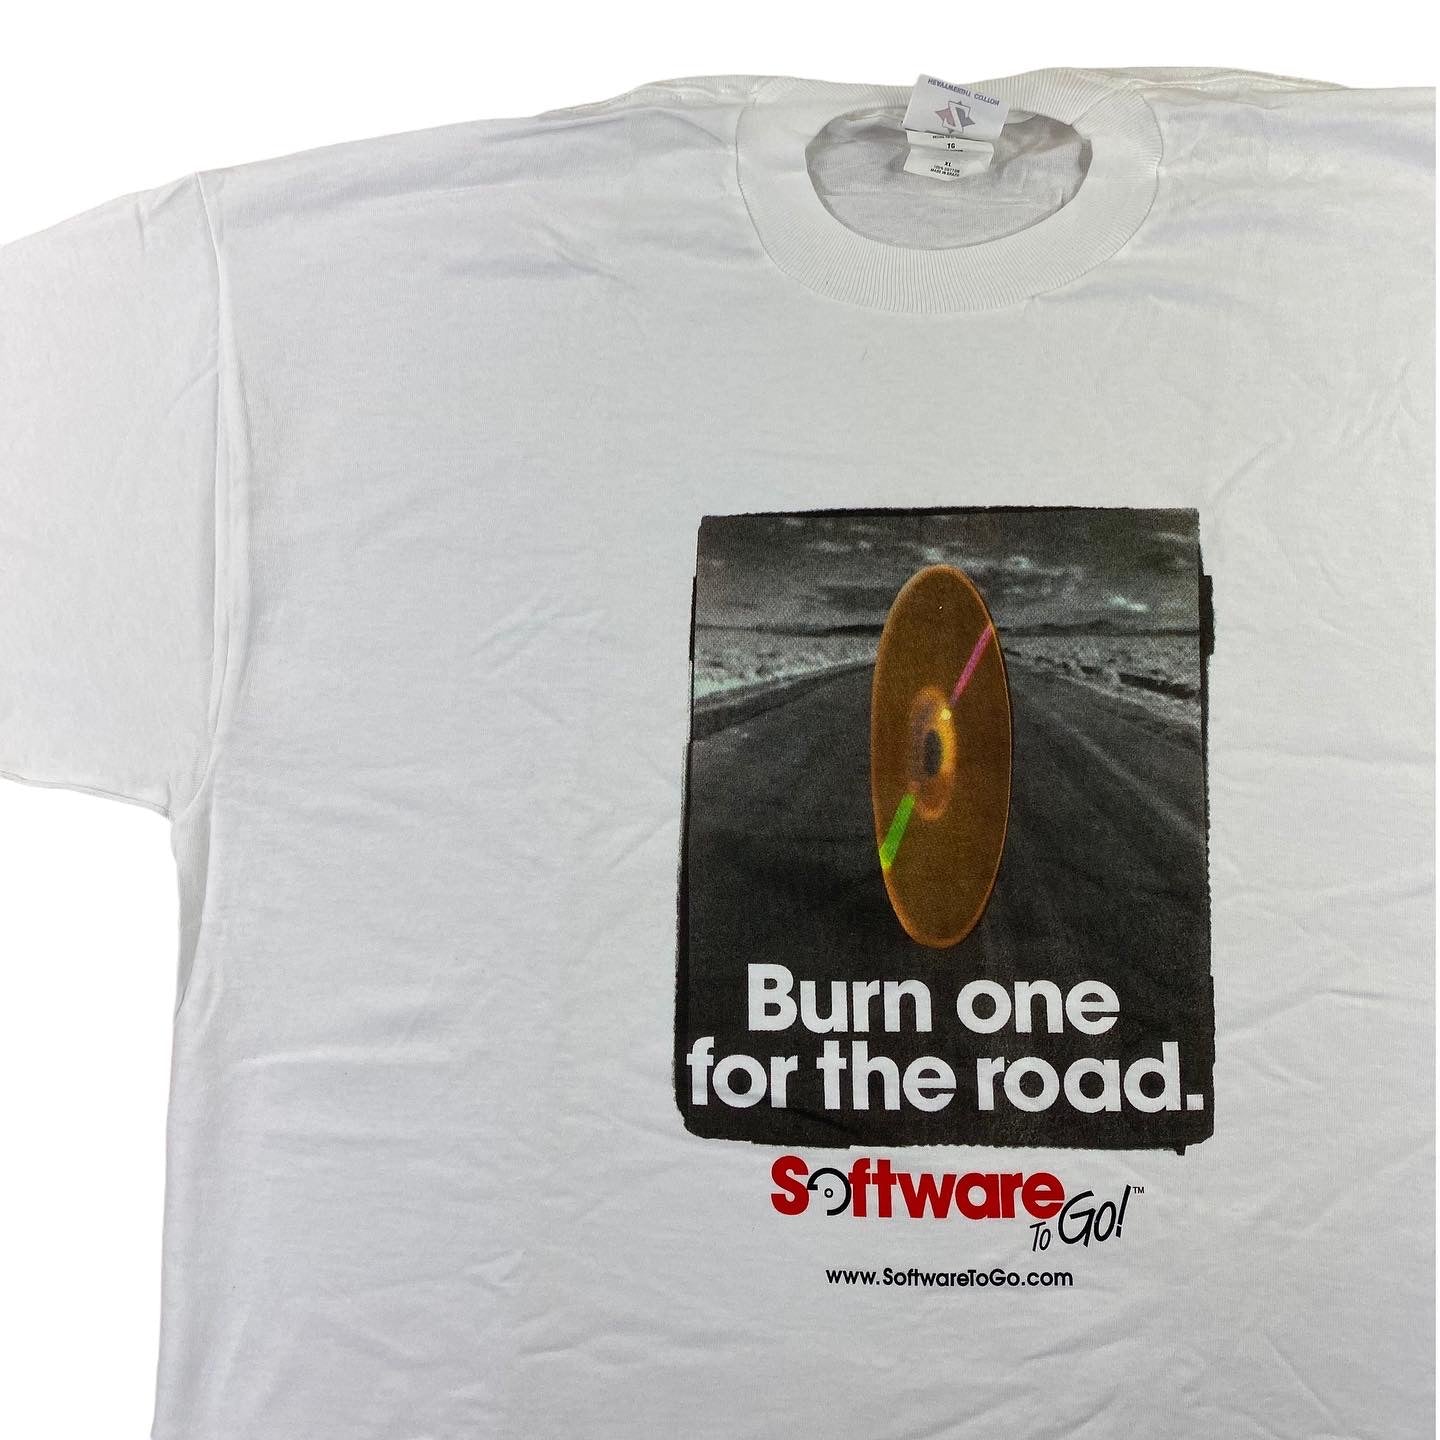 Tech "Burn one for the road" tee - Extra Large